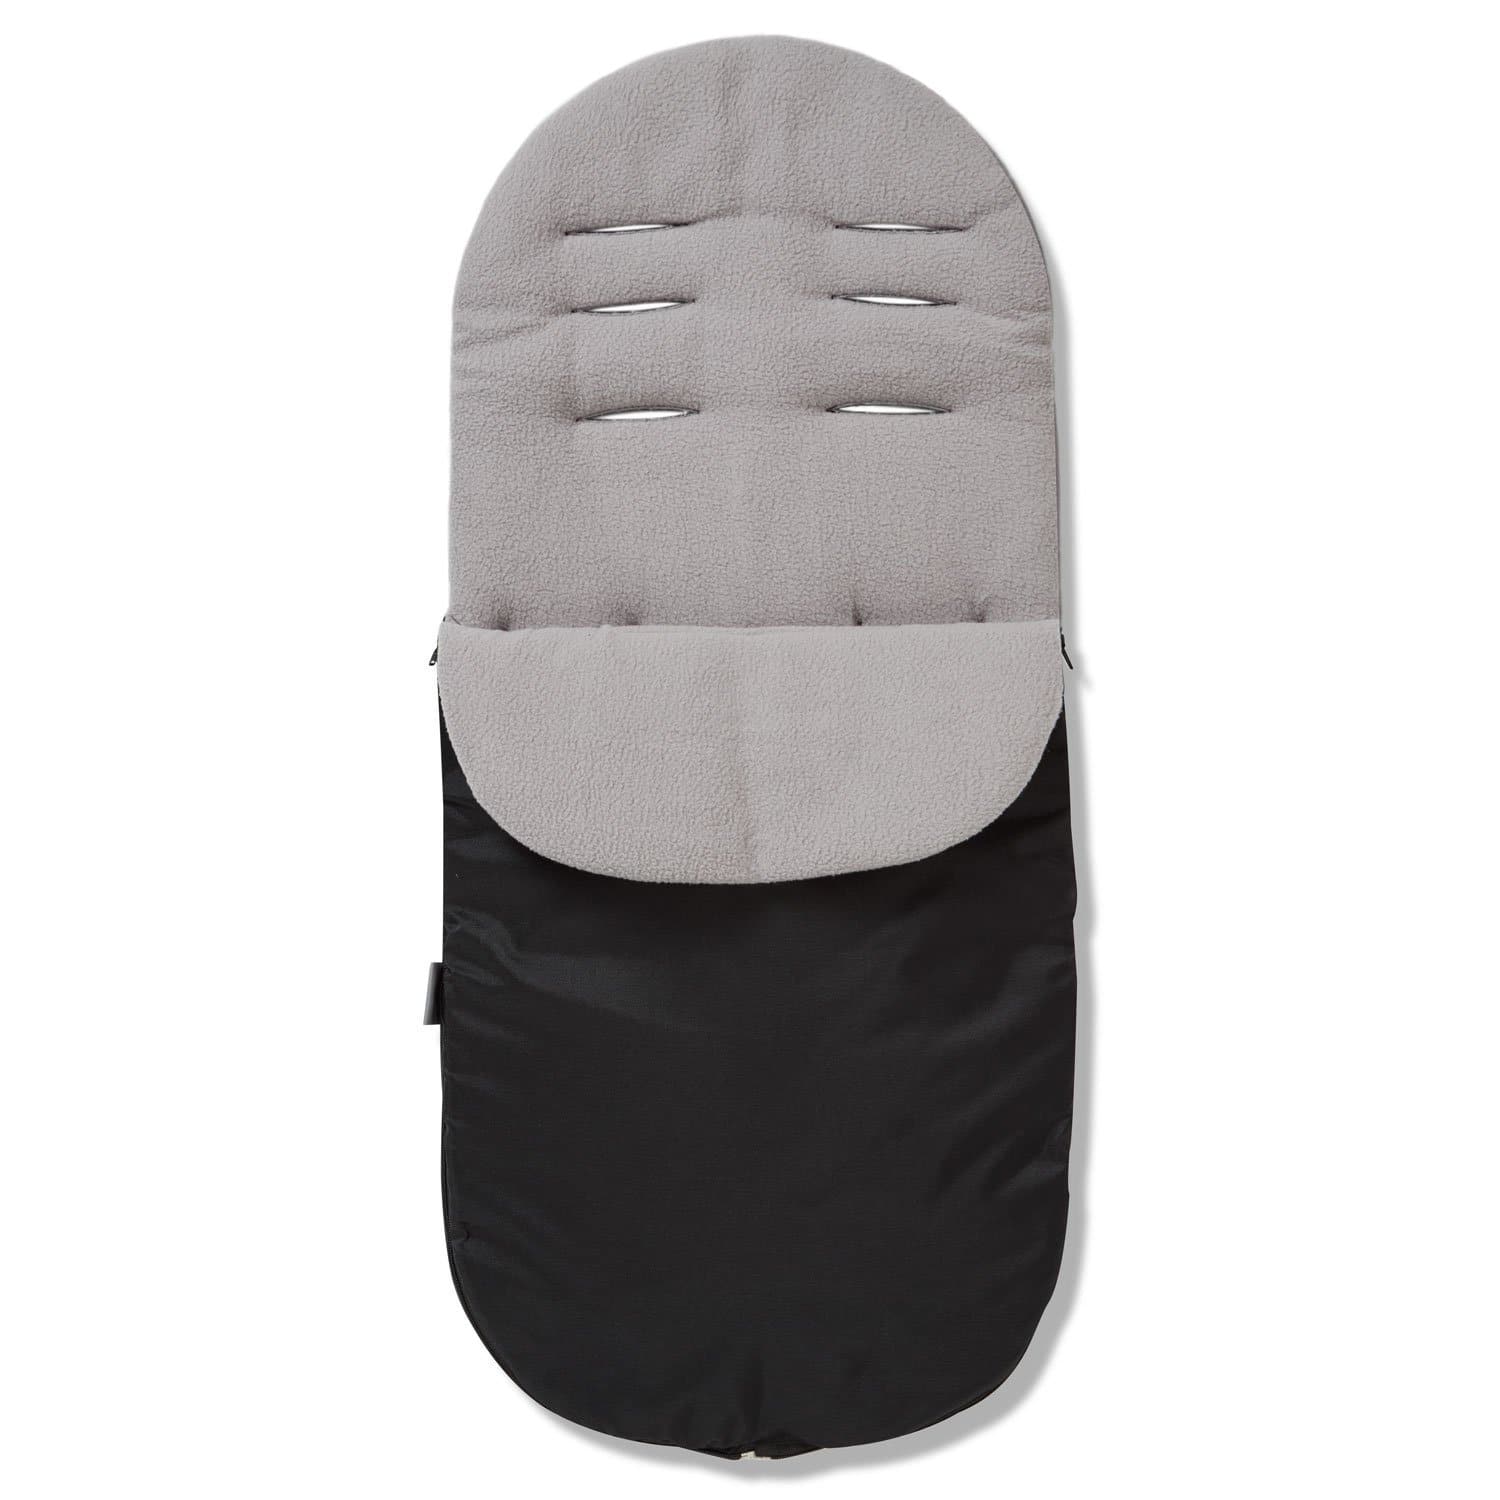 Footmuff / Cosy Toes Compatible with Babybus - Grey / Fits All Models | For Your Little One